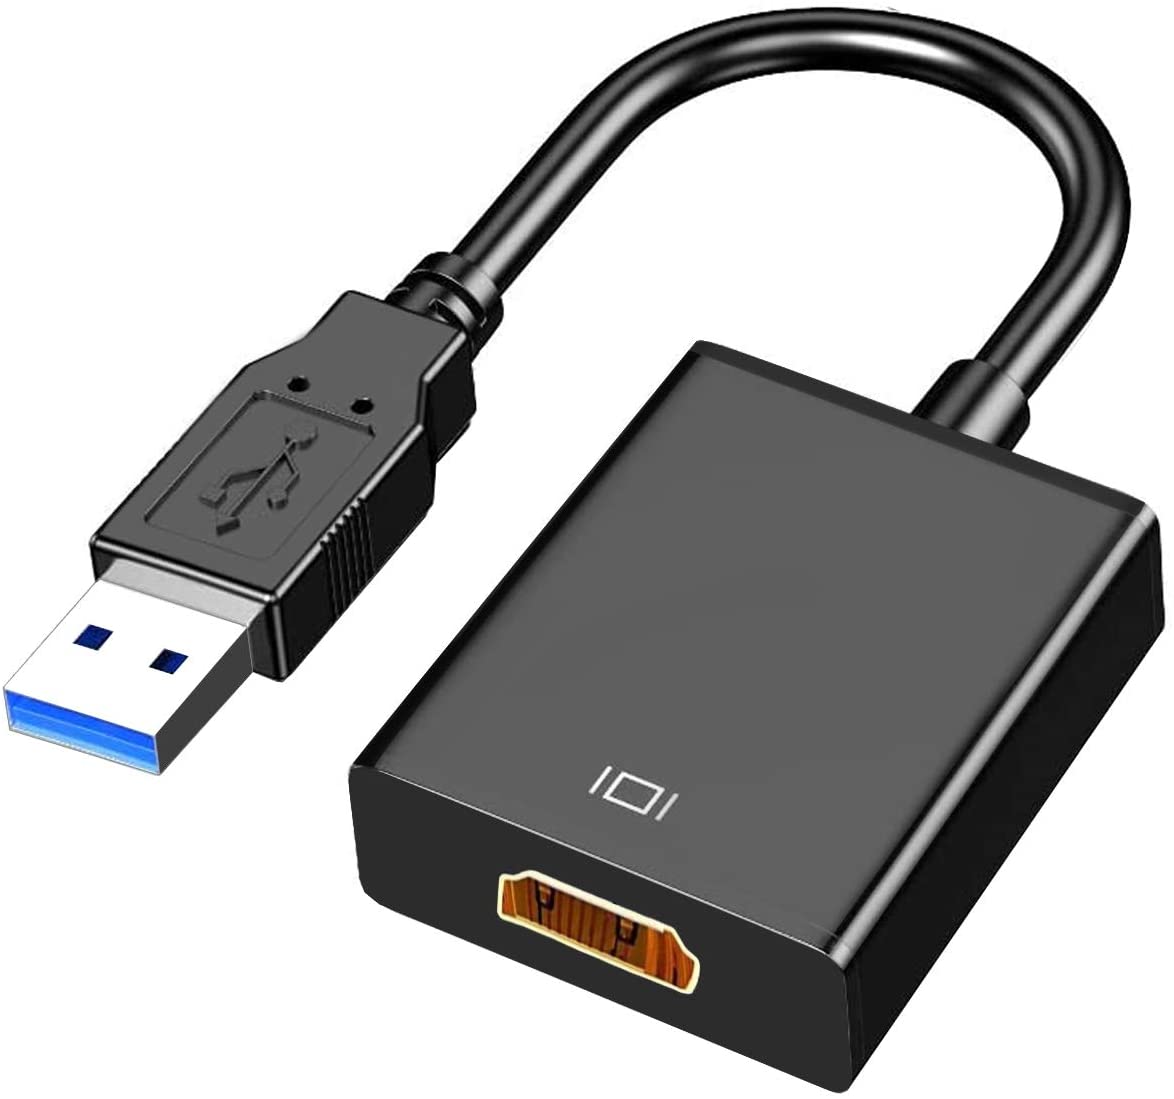 USB to HDMI Adapter, USB 3.0/2.0 to HDMI Cable Multi-Display Video Converter- PC Laptop Windows 7 8 10,Desktop - e4cents